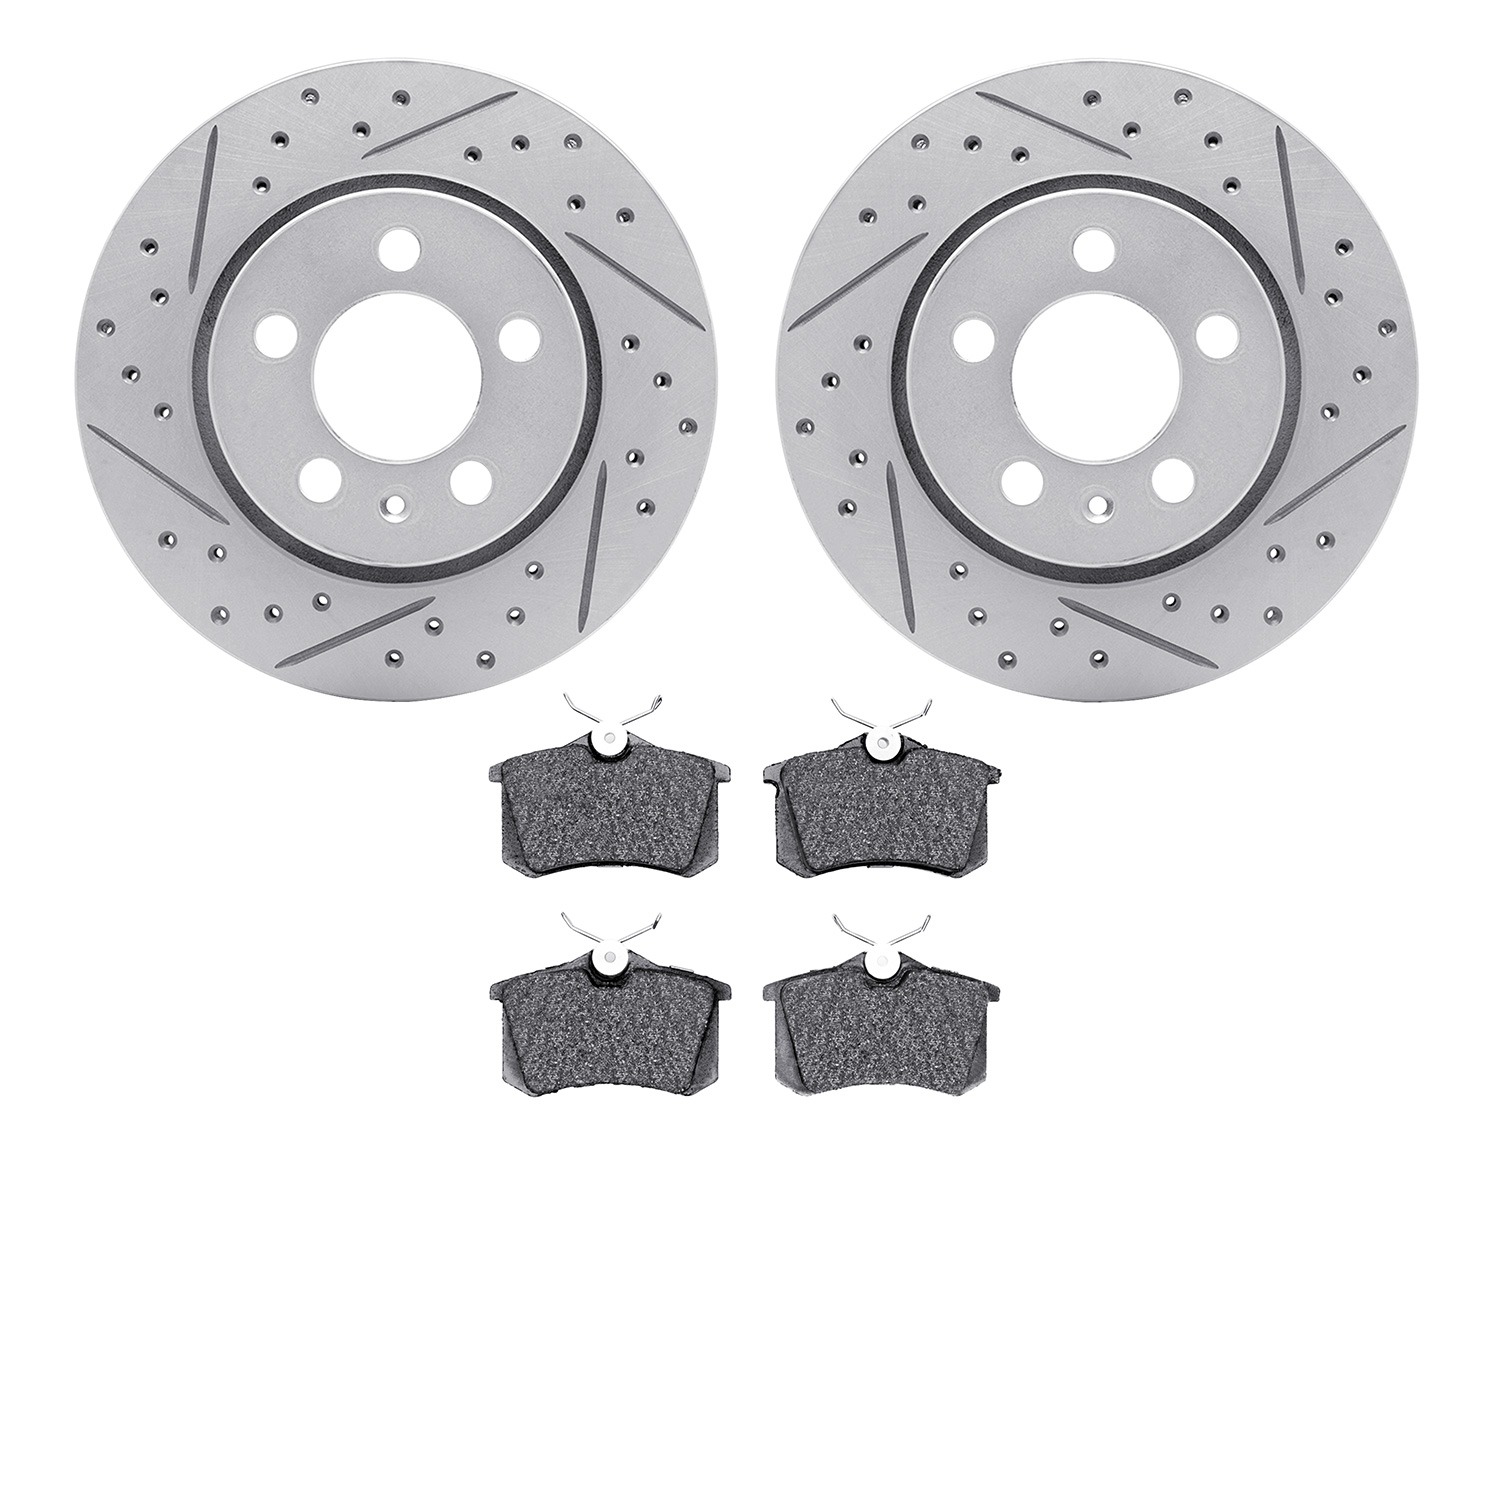 2502-74030 Geoperformance Drilled/Slotted Rotors w/5000 Advanced Brake Pads Kit, 2000-2006 Audi/Volkswagen, Position: Rear